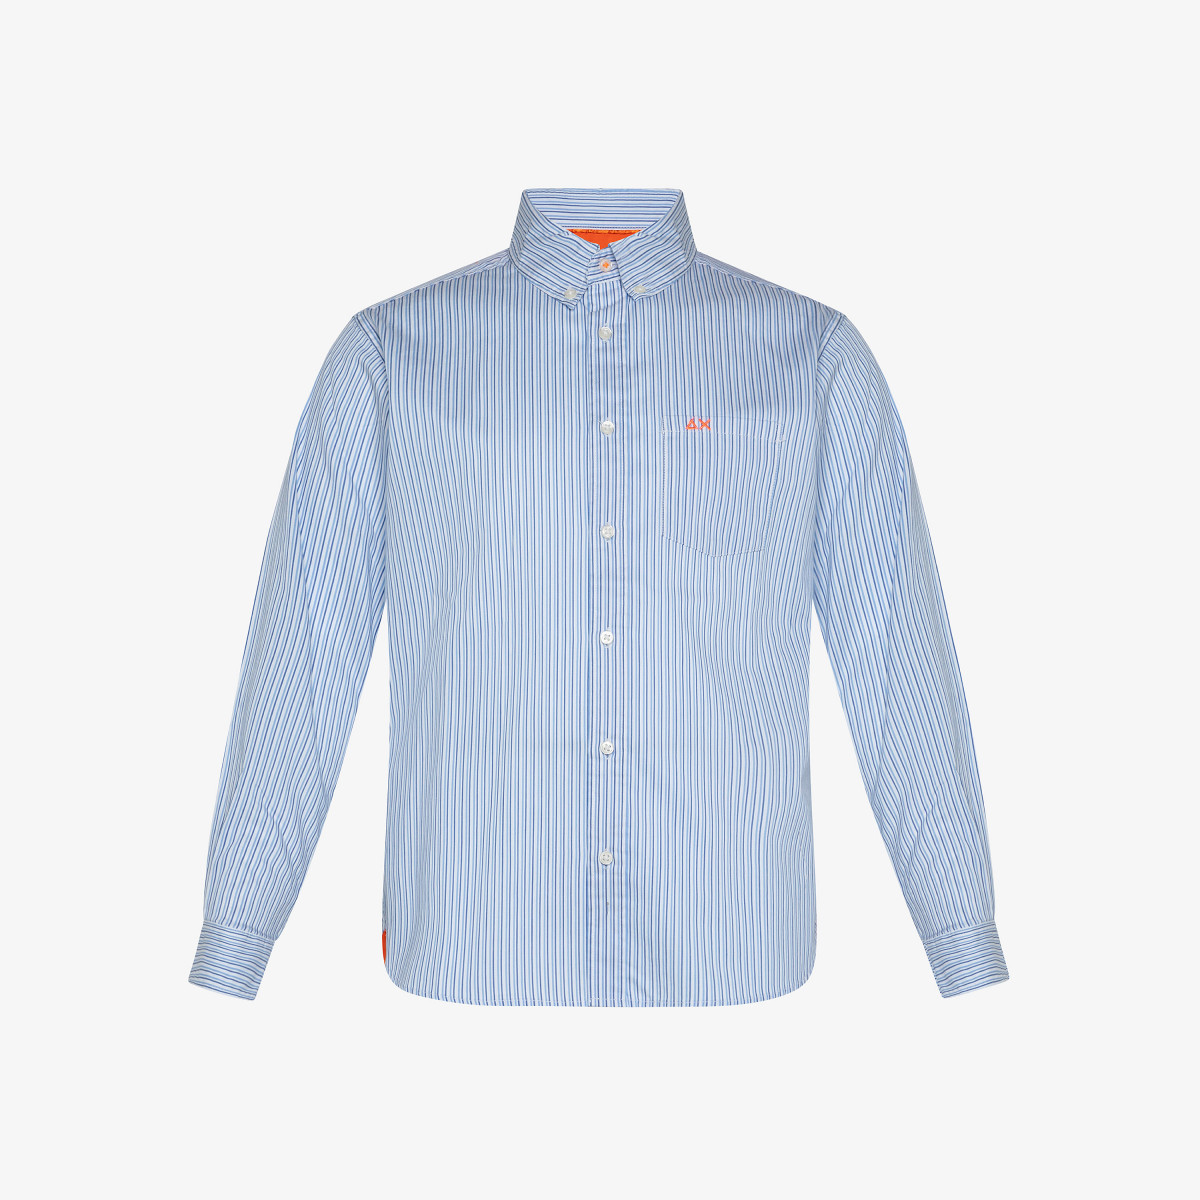 BOY'S SHIRT CLASSIC STRIPE WITH FLUO DETAIL WHITE/LIGHT BLUE